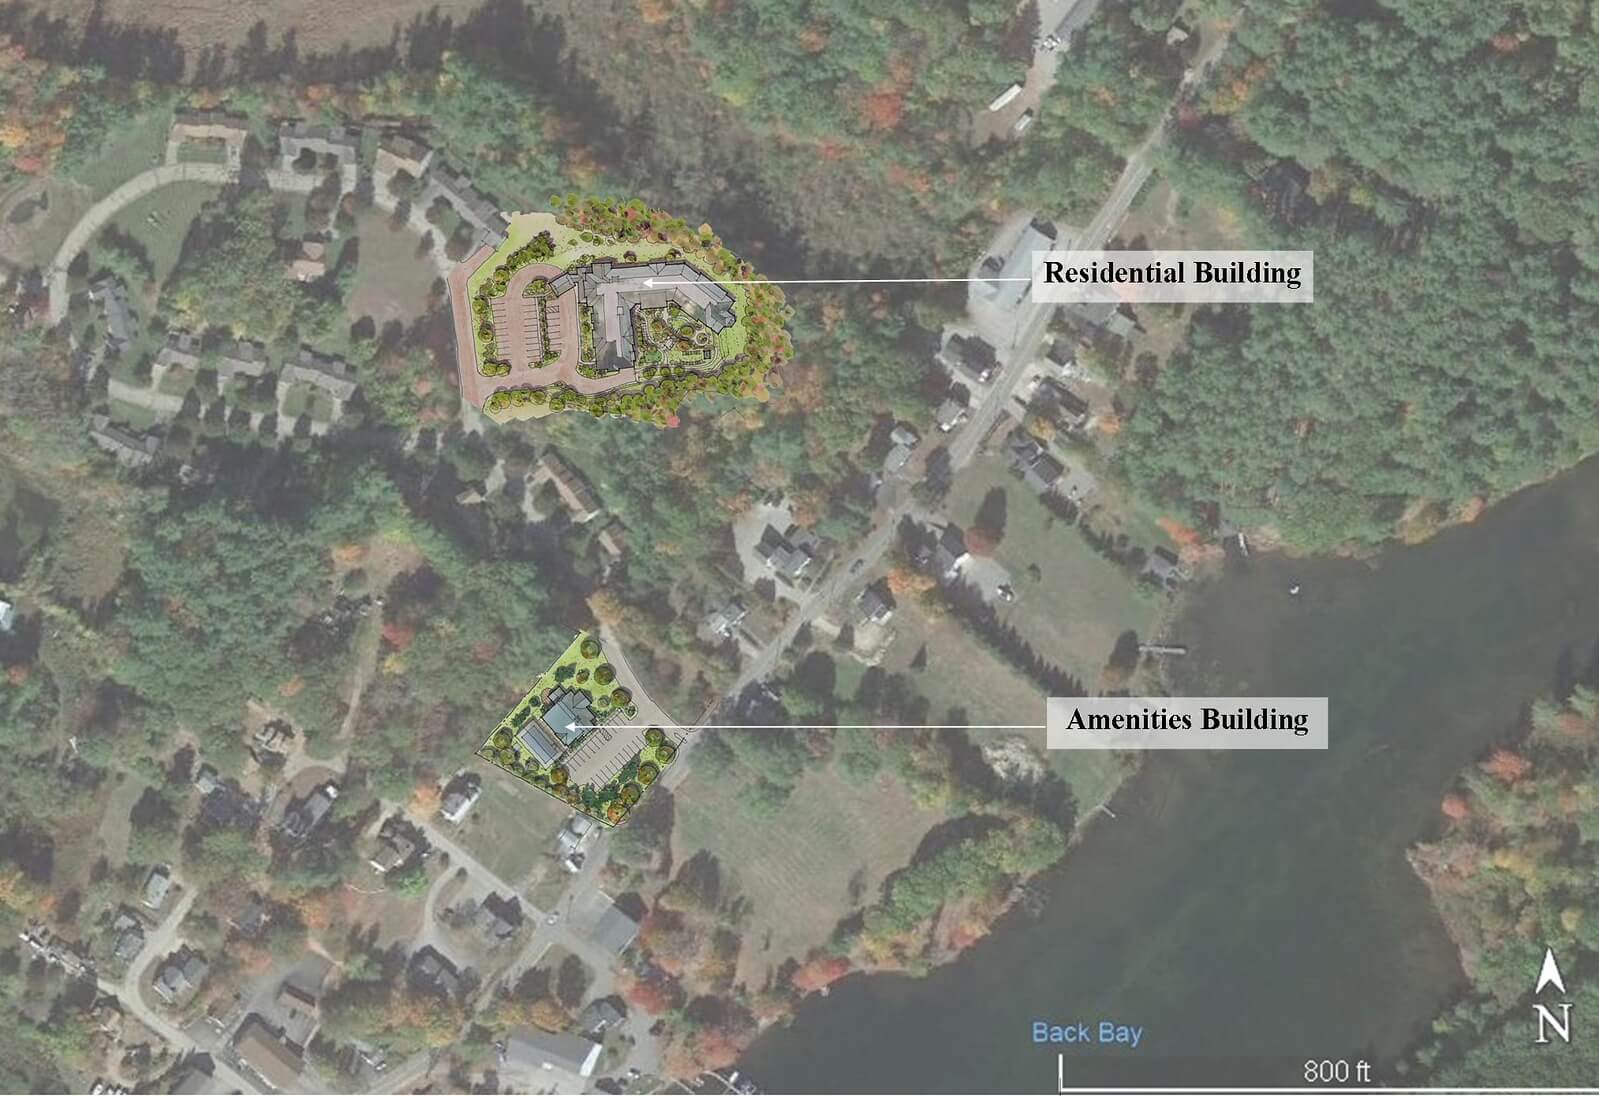 Aerial map of a senior living facility complex. The map has markers highlighting certain areas.